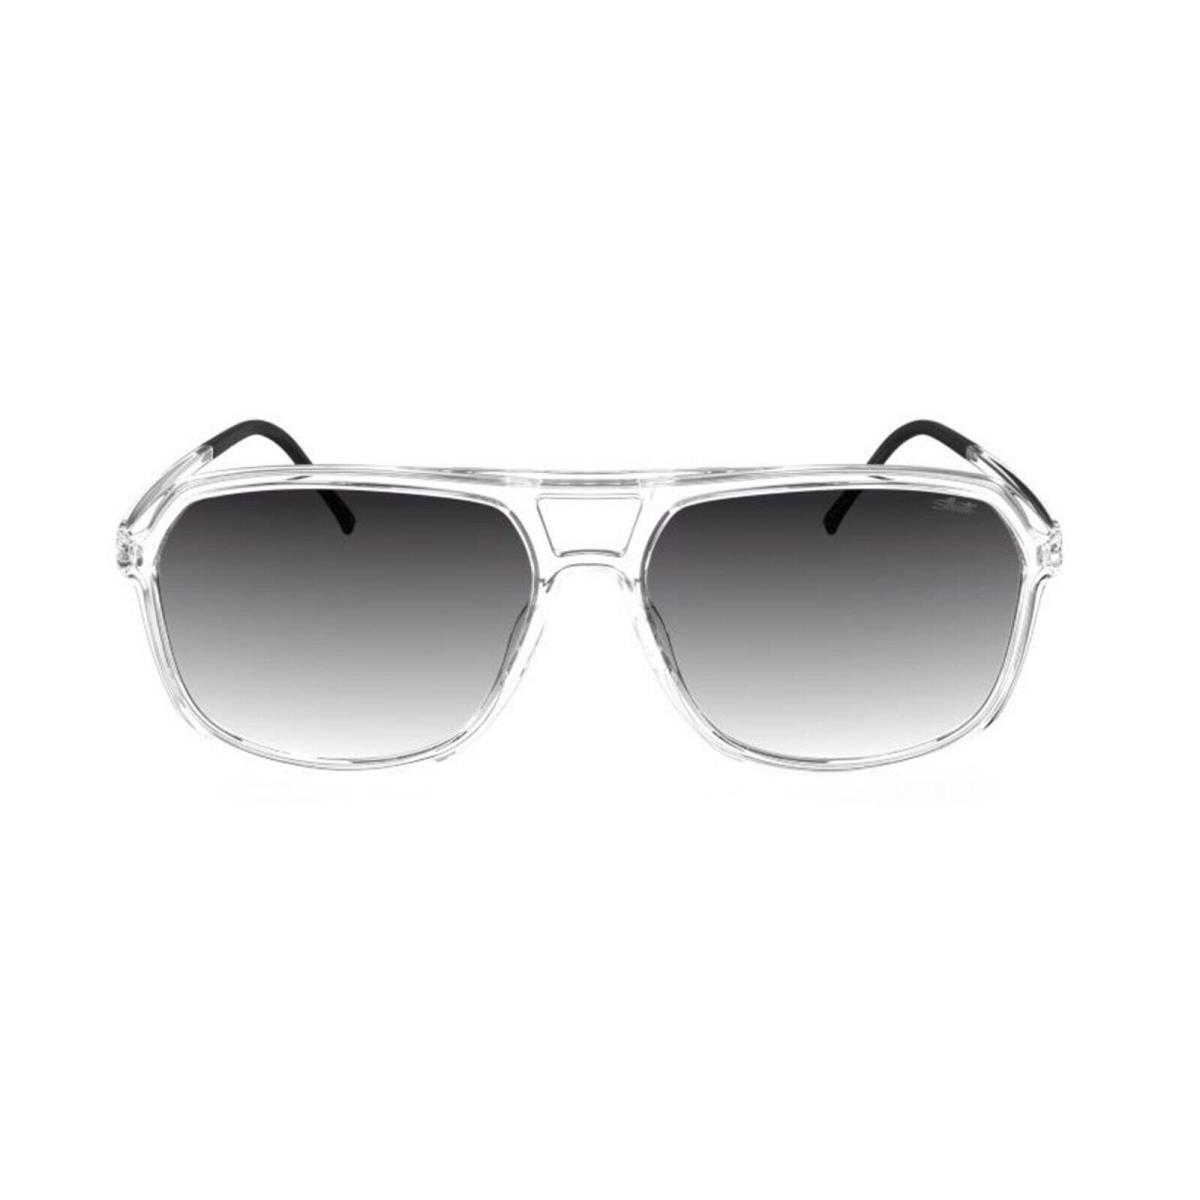 Silhouette Midtown 4080 Pure Crystal/classic Grey Shaded 1010 Sunglasses